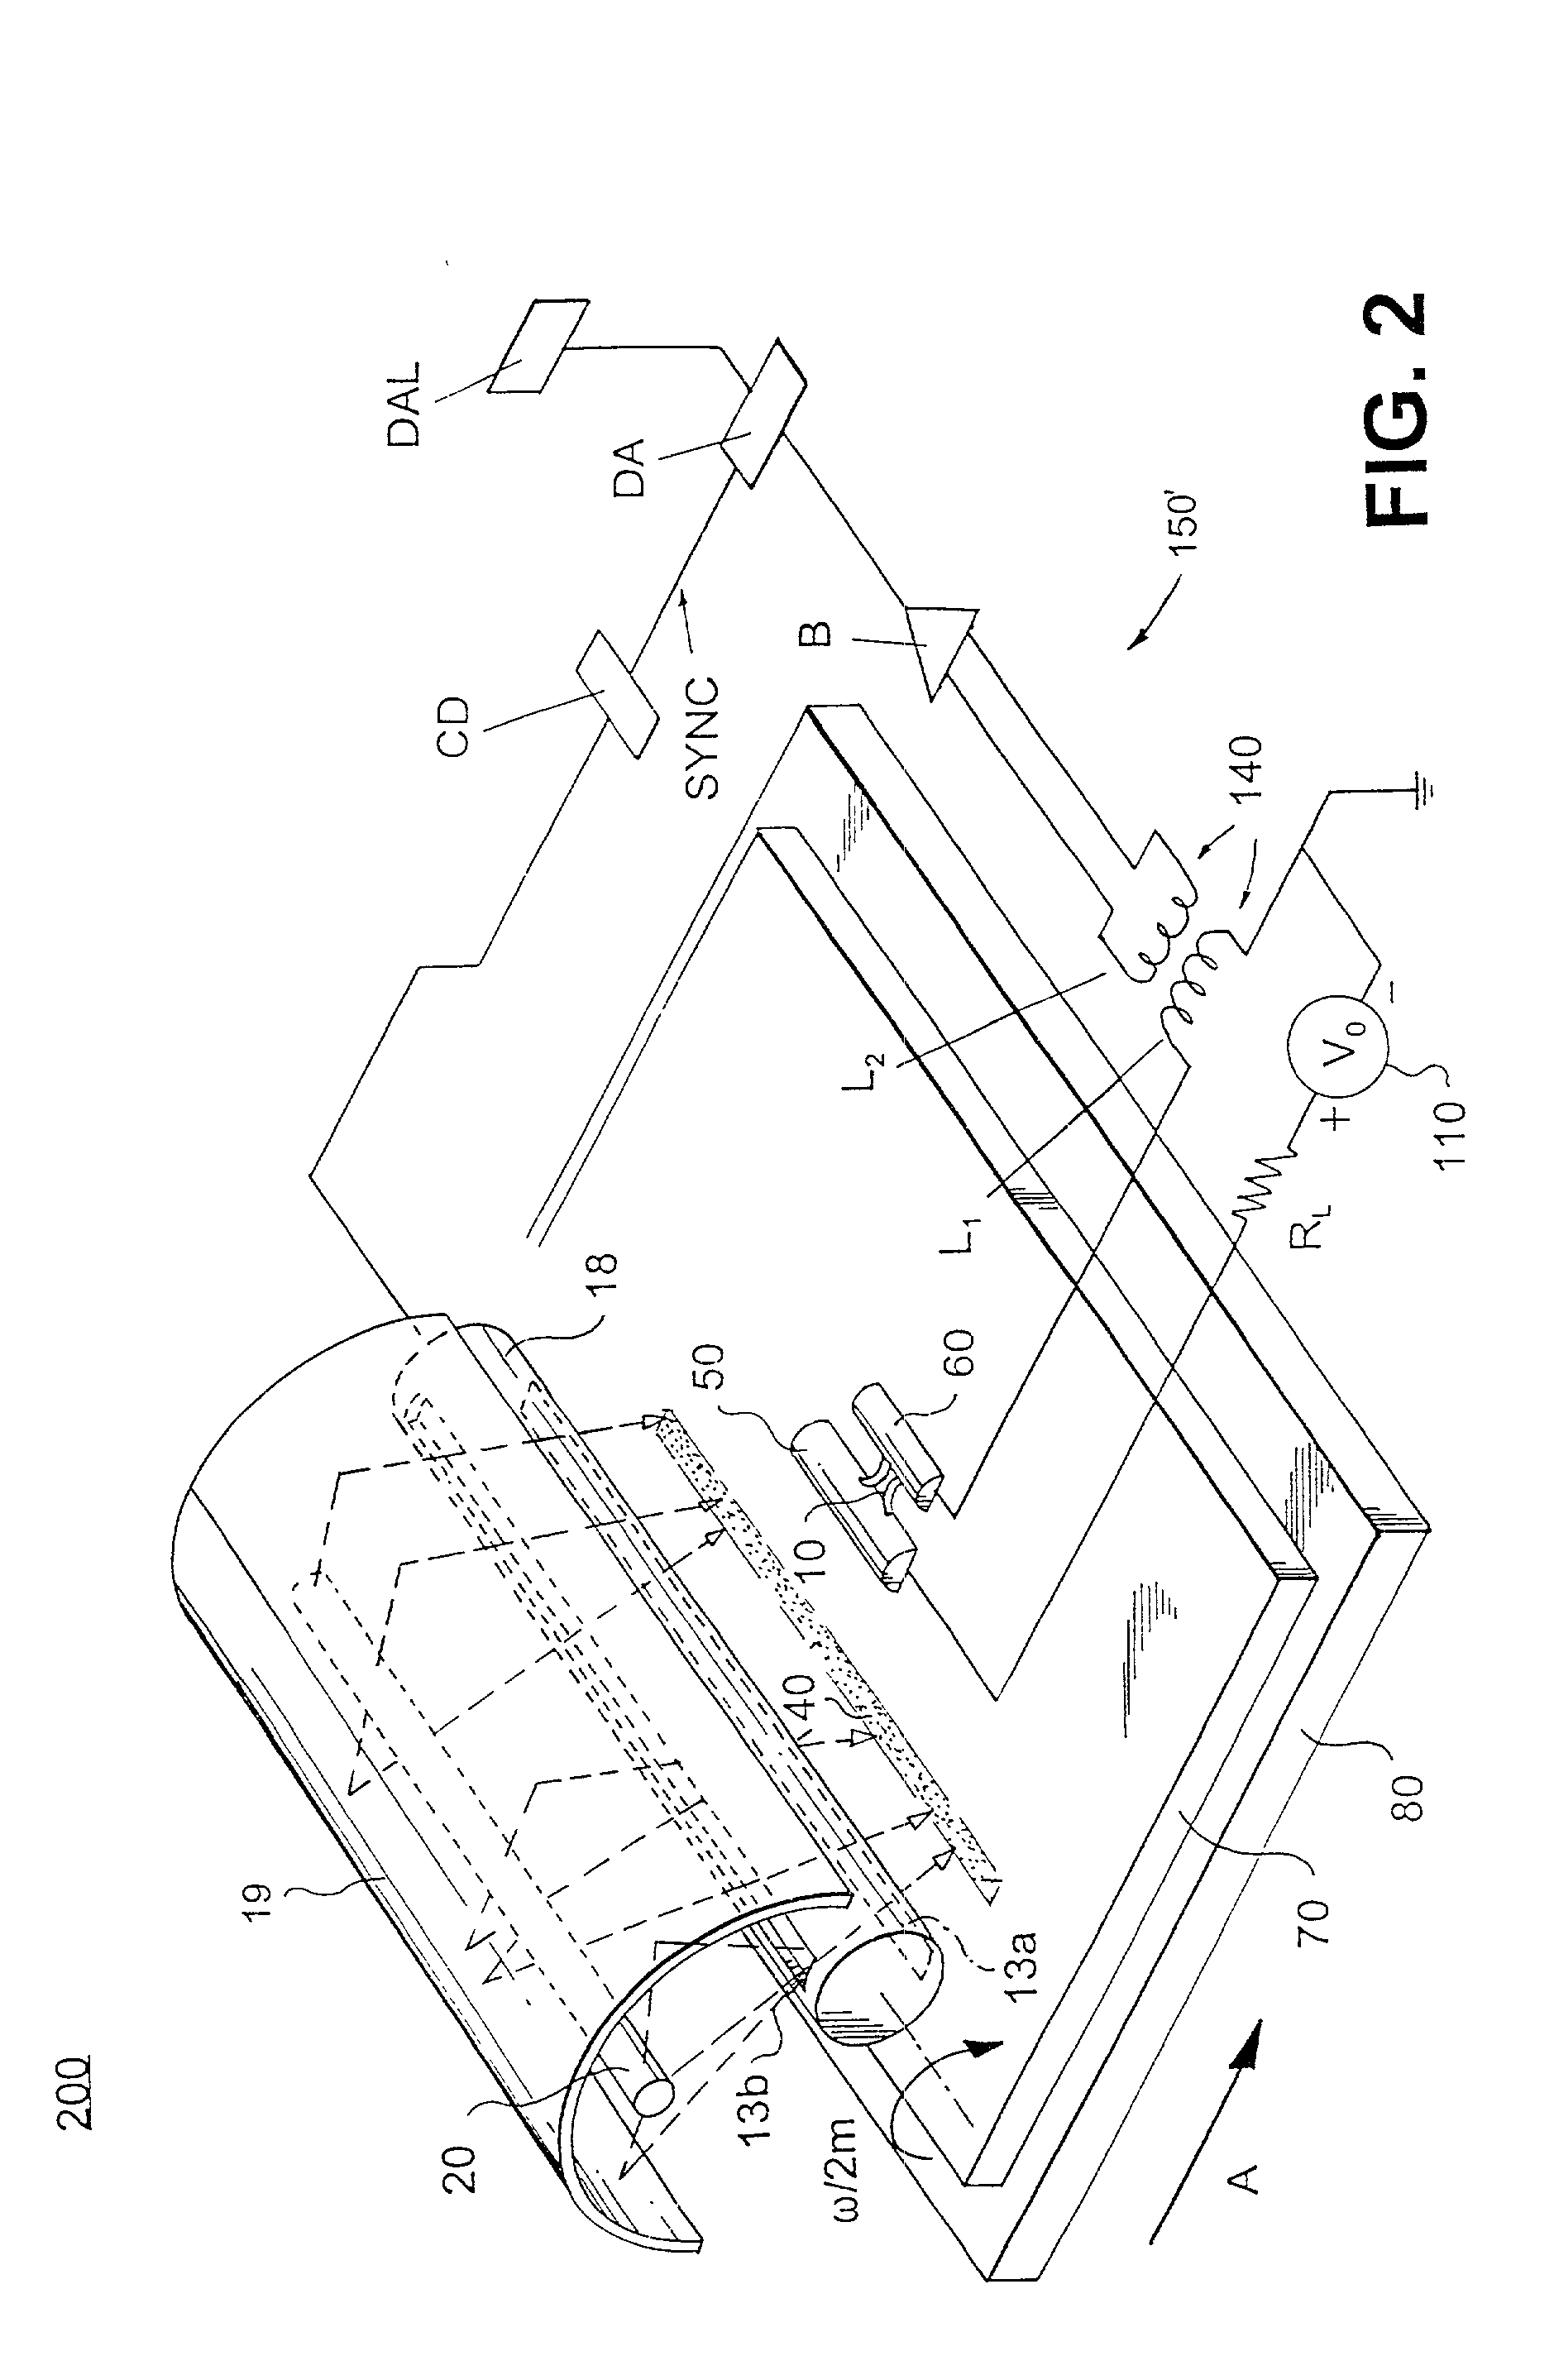 Thermal modulation system and method for locating a circuit defect